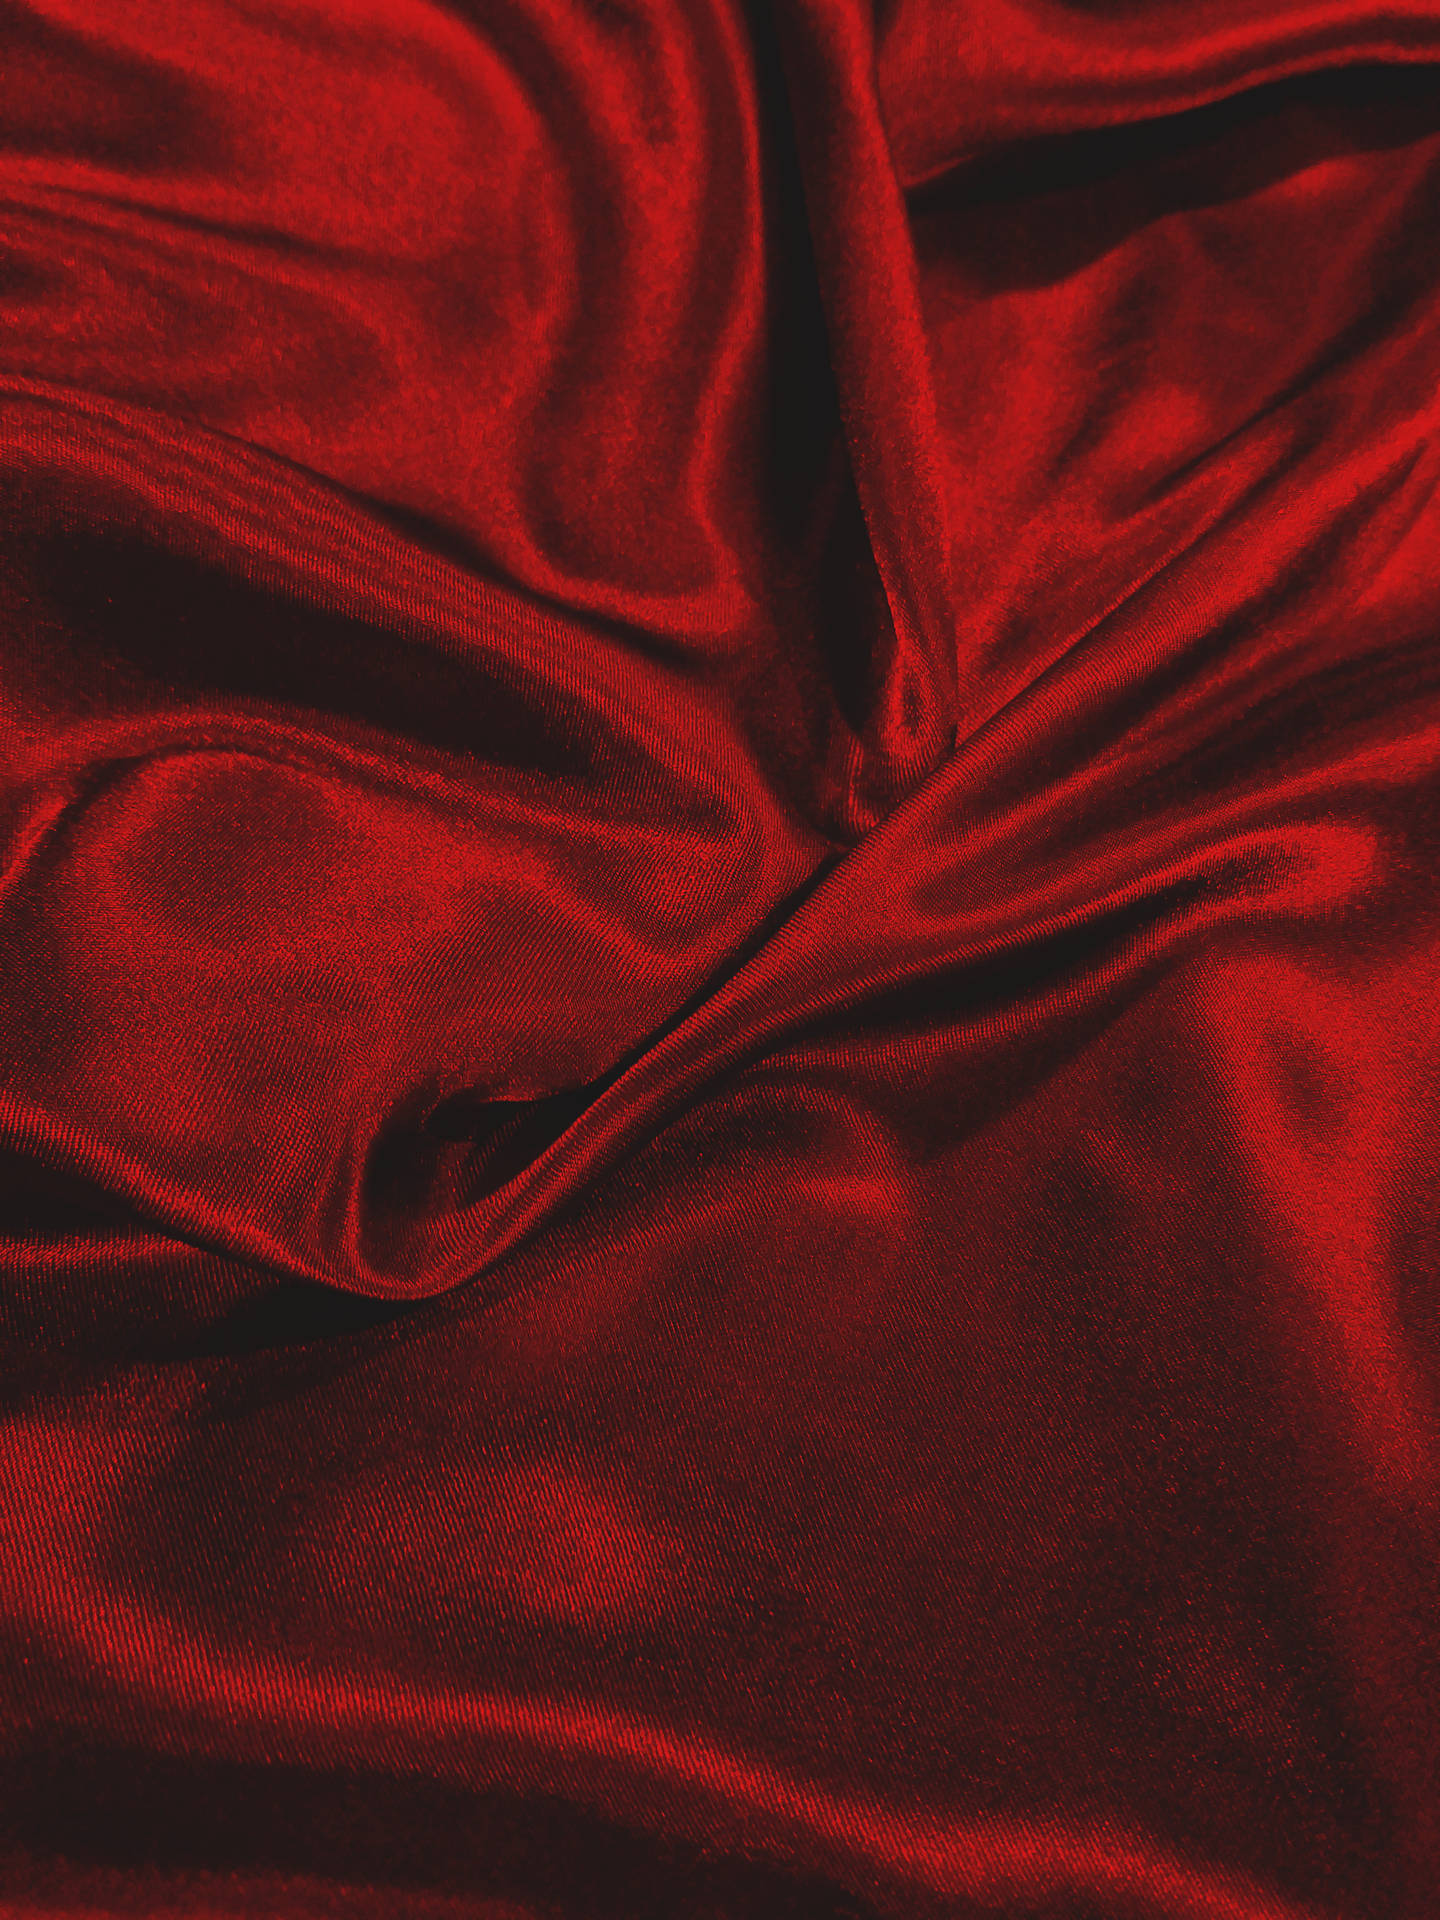 Free Plain Red Background Photos, [100+] Plain Red Background for FREE |  